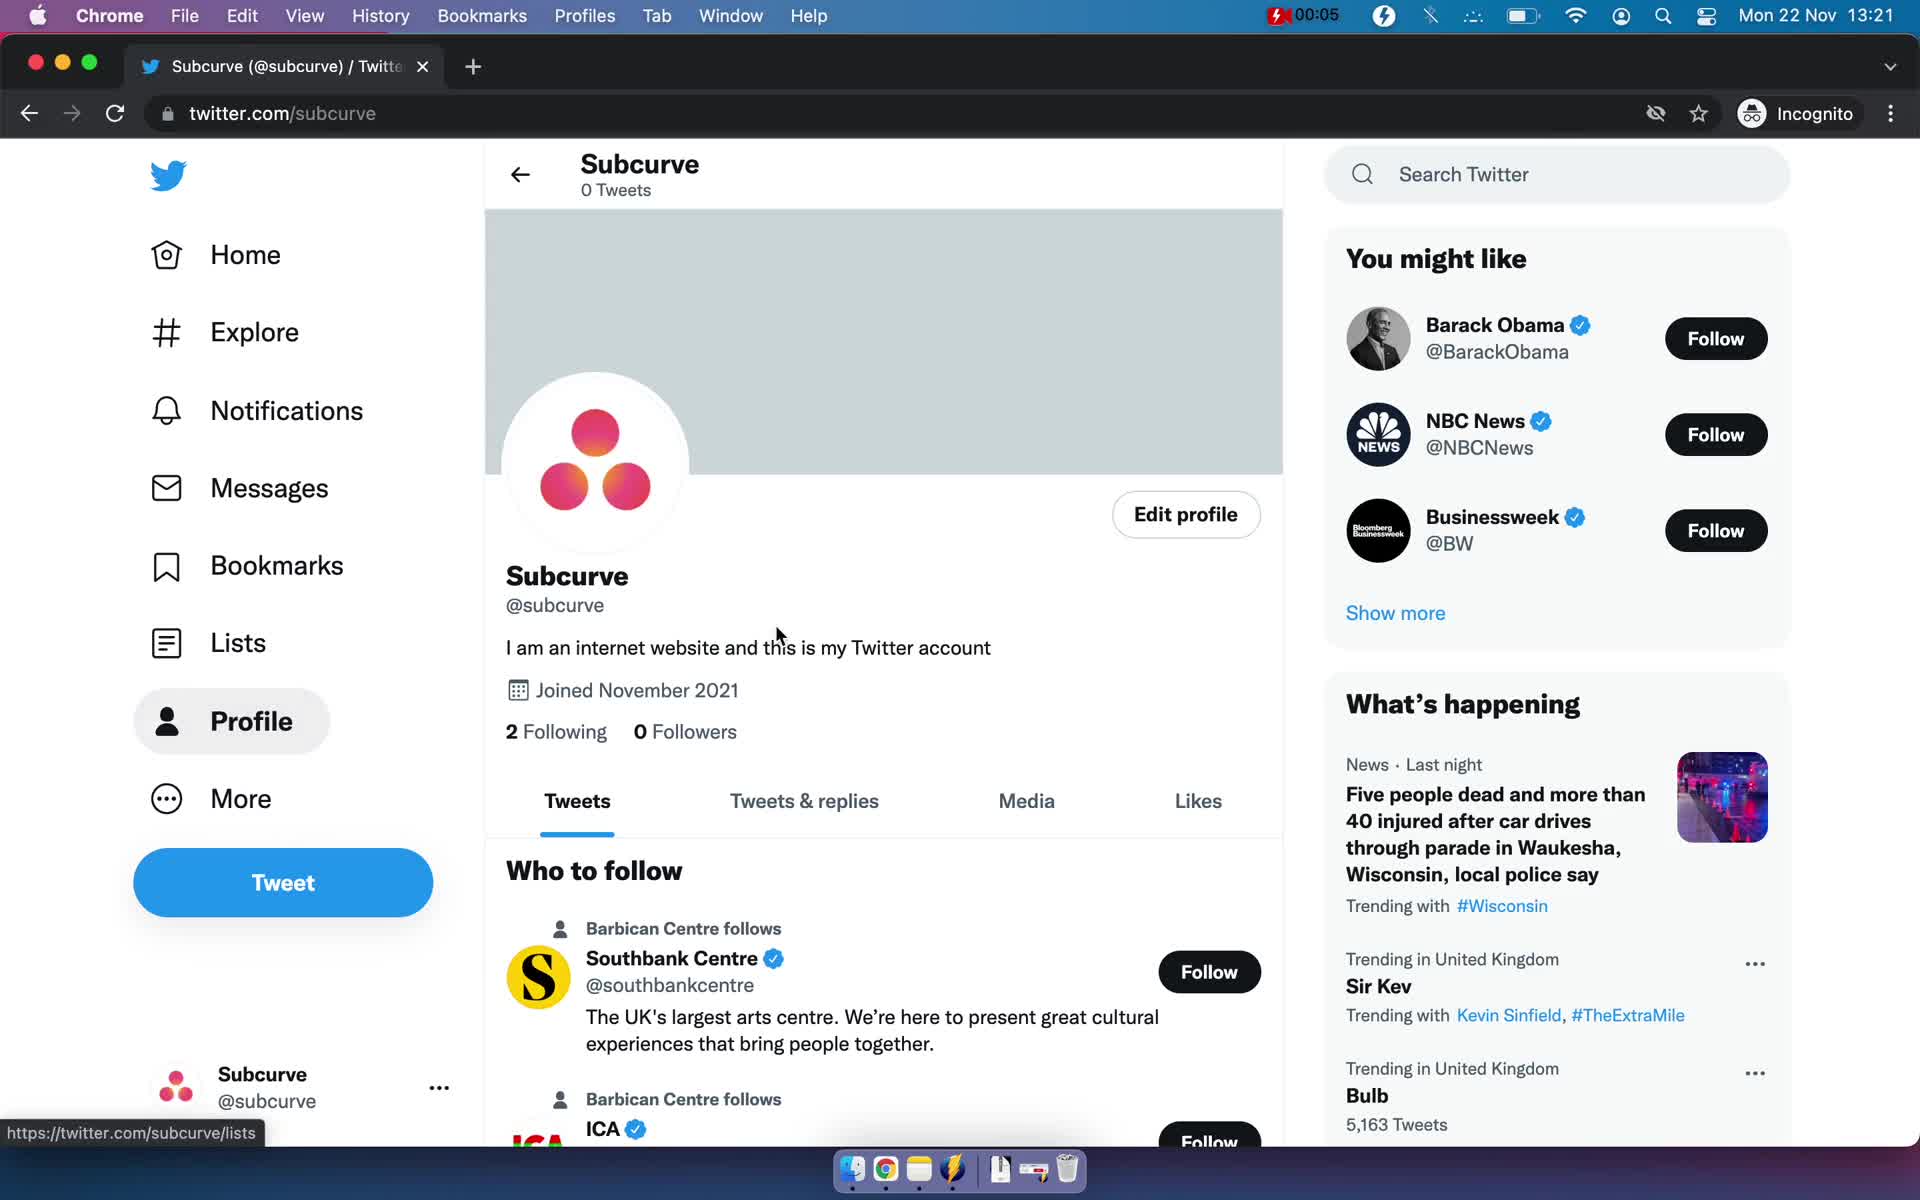 Screenshot of Profile on Updating your profile on Twitter user flow